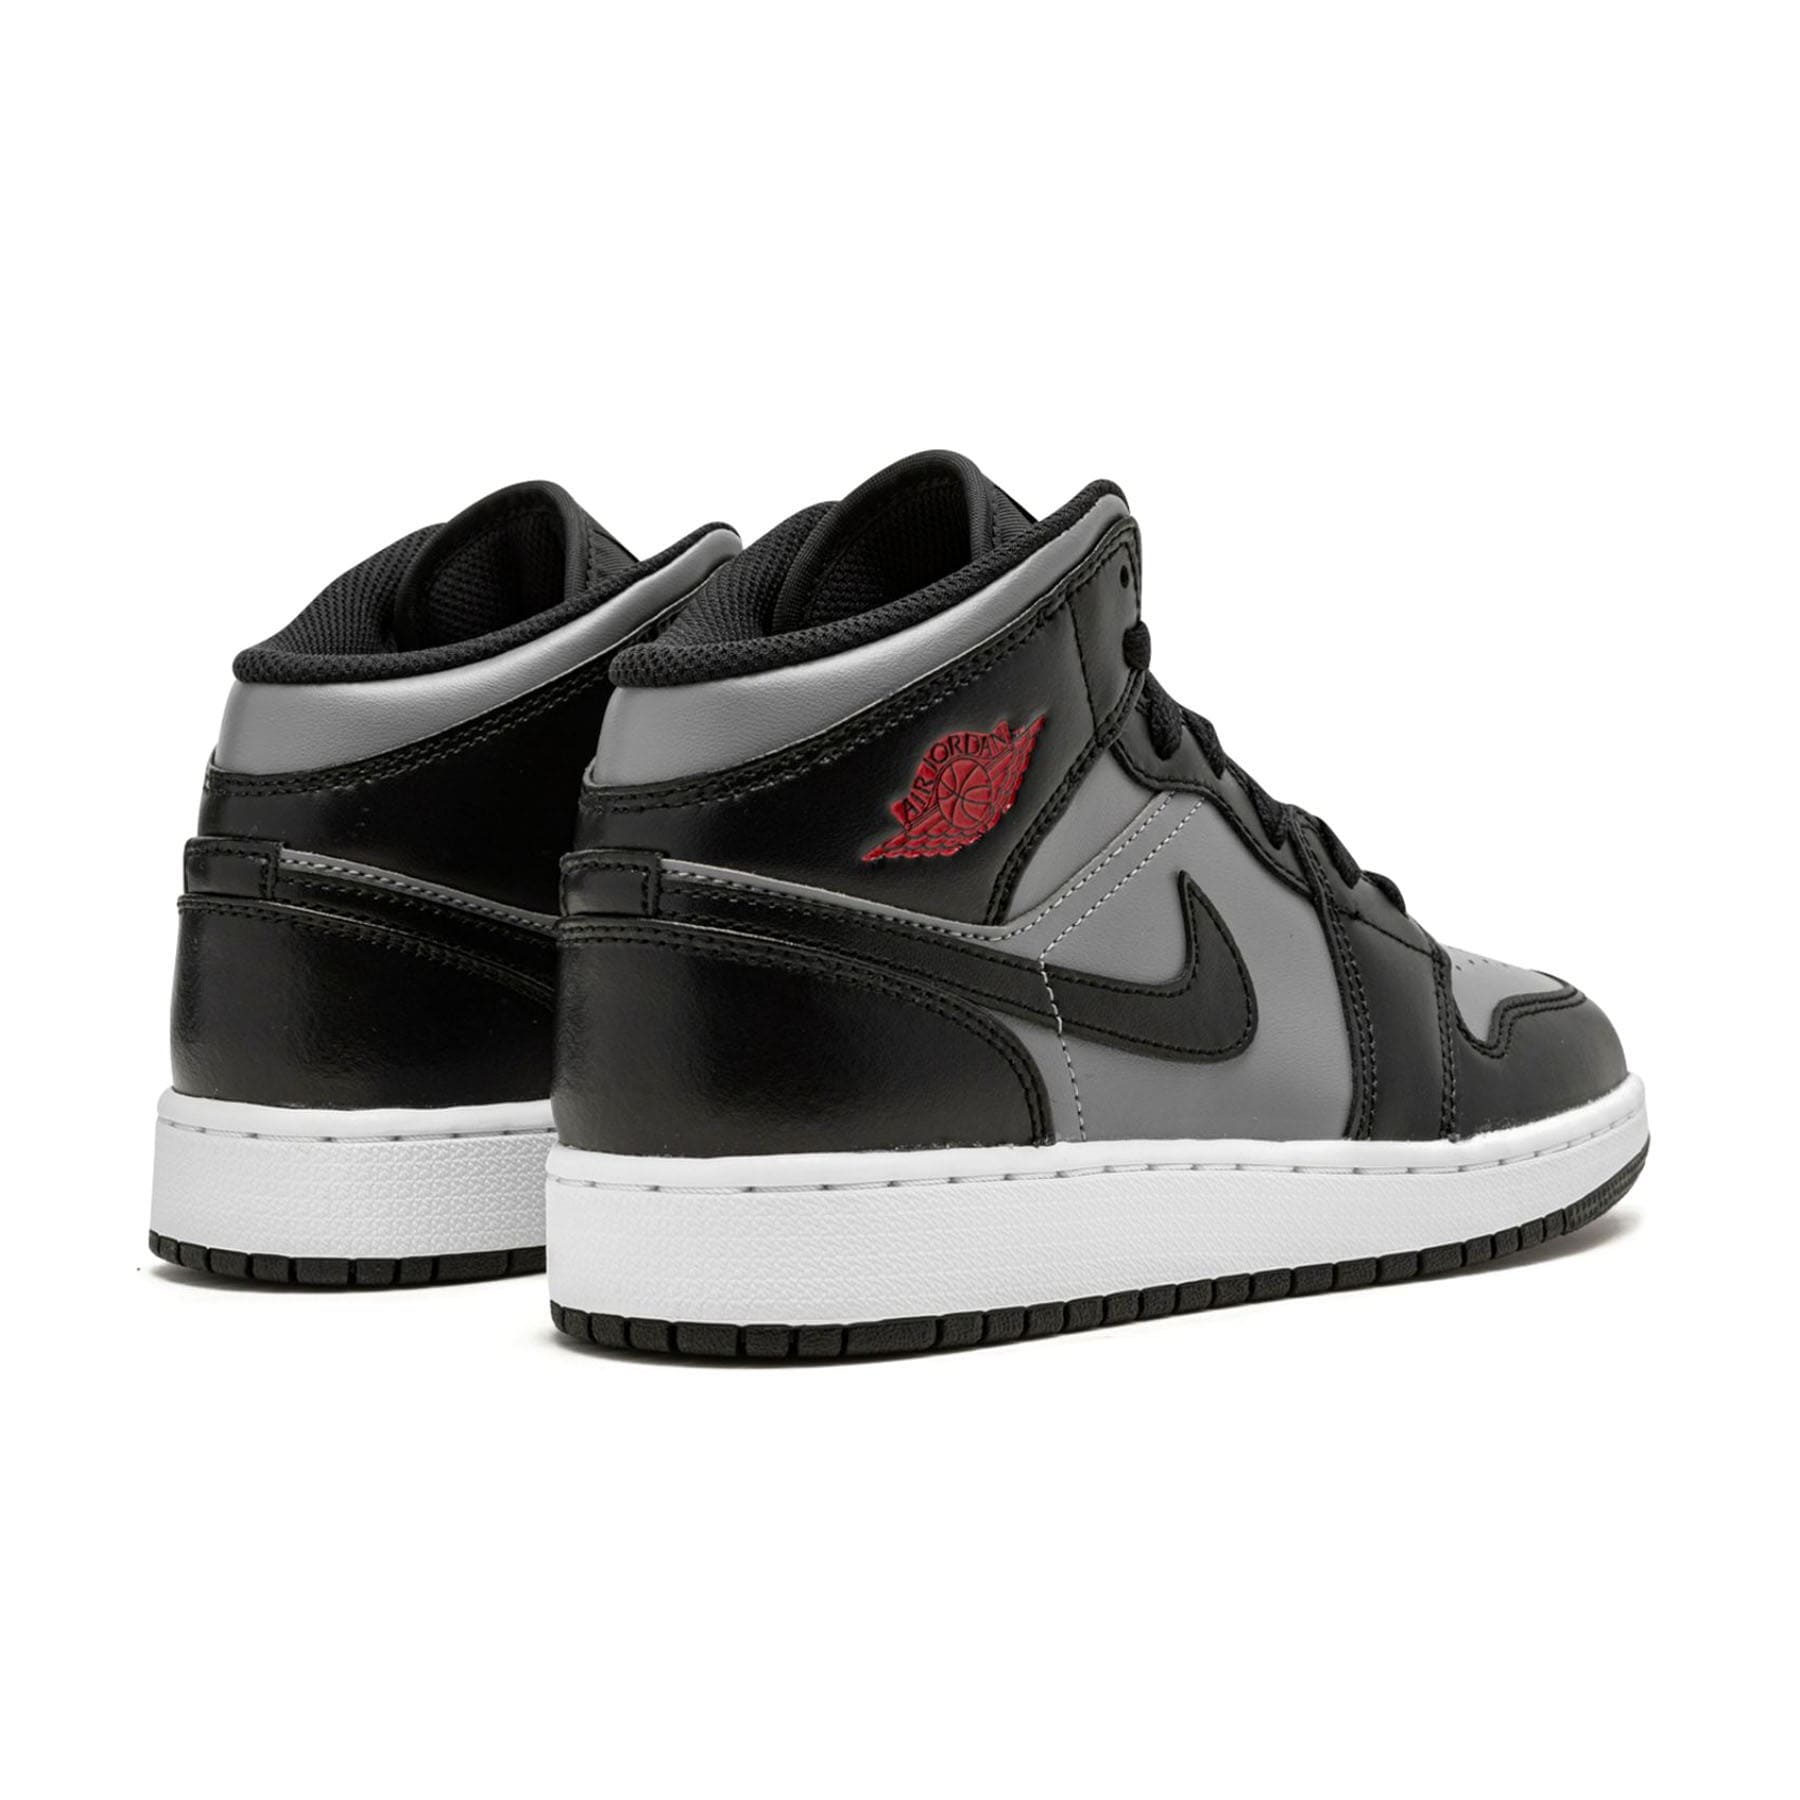 Double Boxed  214.99 Nike Air Jordan 1 Mid Shadow Red Double Boxed